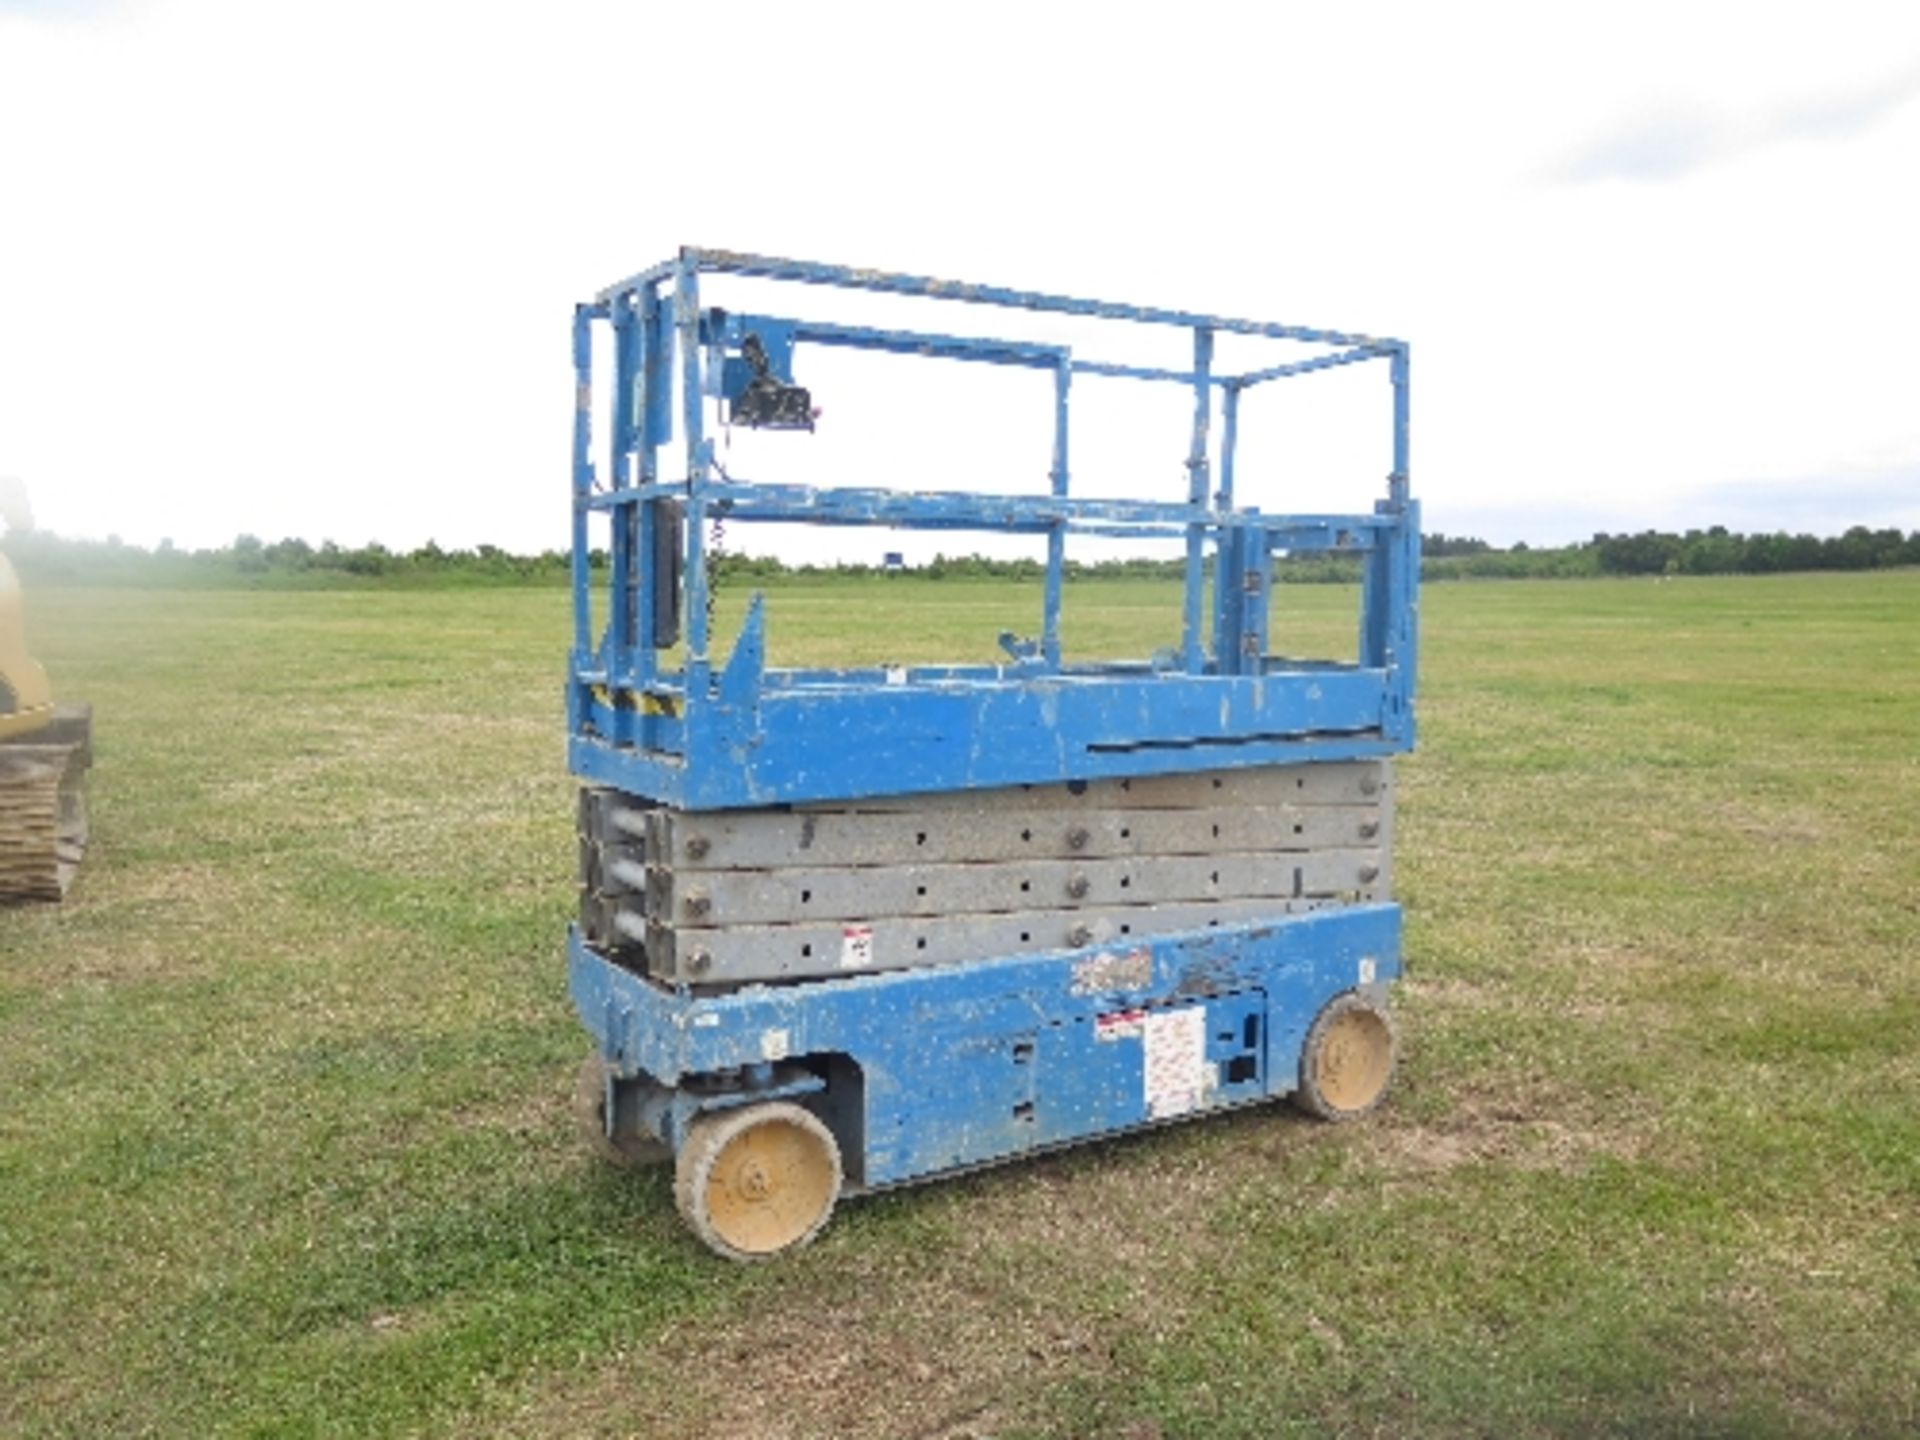 Genie GS2632 scissor lift 327 hrs  148772
BELIEVED 2006
 
ALL OK
ALL LOTS are SOLD AS SEEN